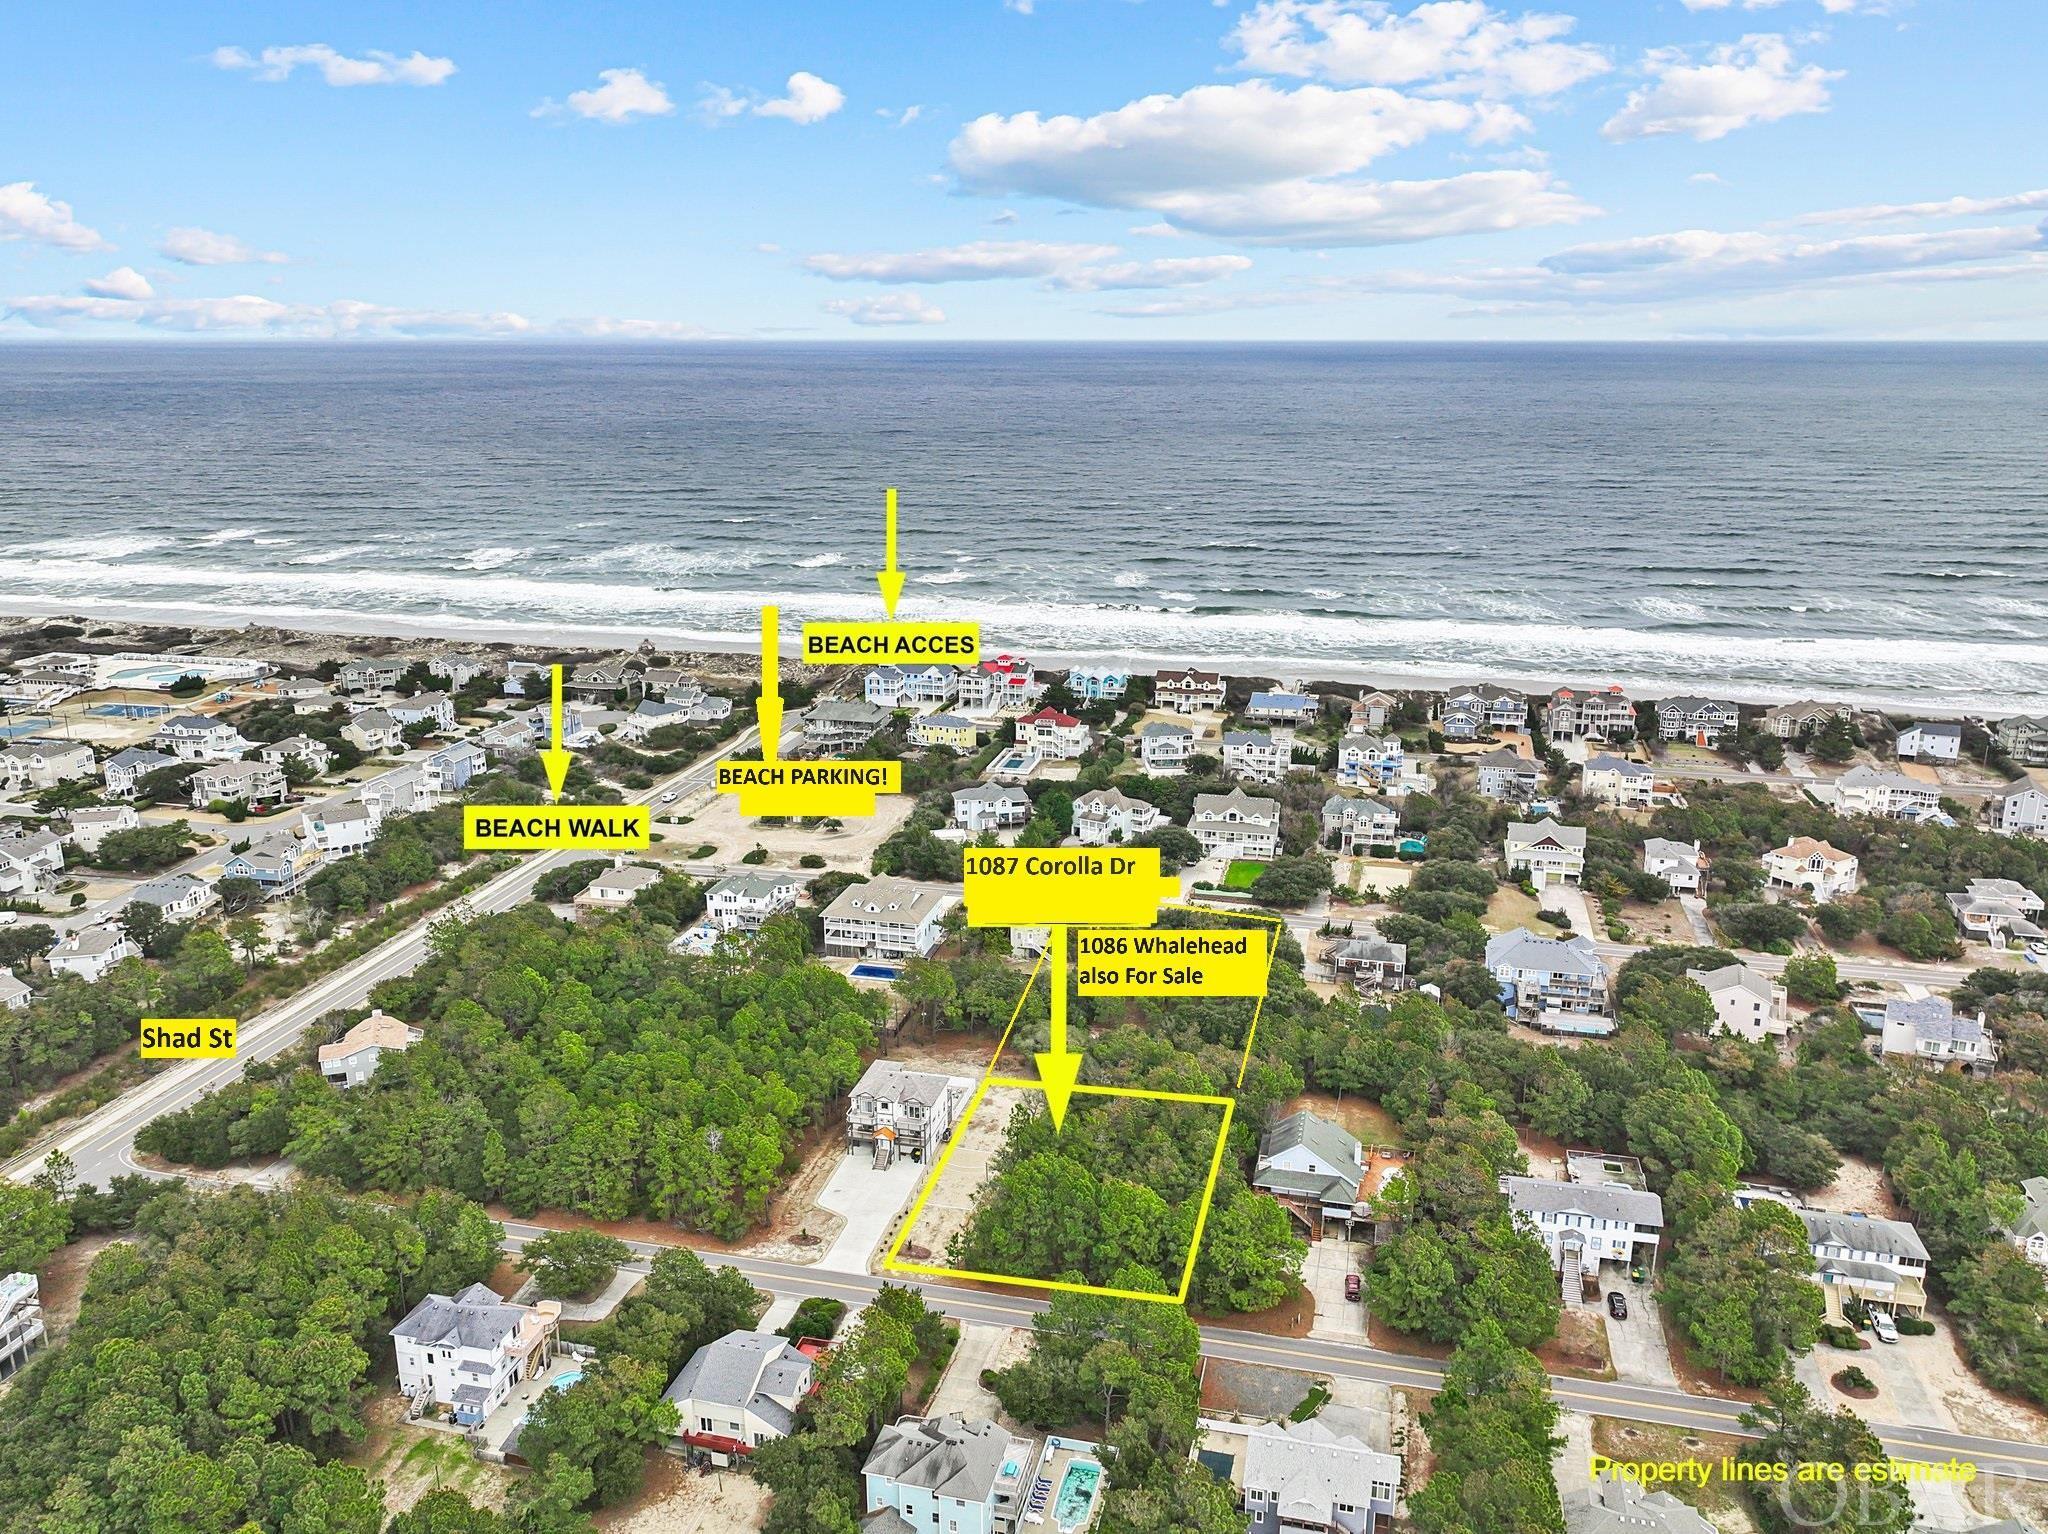 ONLY 1 OF 2 LOTS CURRENTLY FOR SALE IN WHALEHEAD.  1086 WHALEHEAD IS THE OTHER LOT FOR SALE OWNED BY SAME FAMILY AND BACKS UP TO THIS LOT!  BUY BOTH FOR FAMILY COMPOUND OR FOR INVESTMENT PURPOSES.  These lots are close to Shad St Beach Access with Plenty of Parking!  ACT TODAY BEFORE THEY ARE SOLD!